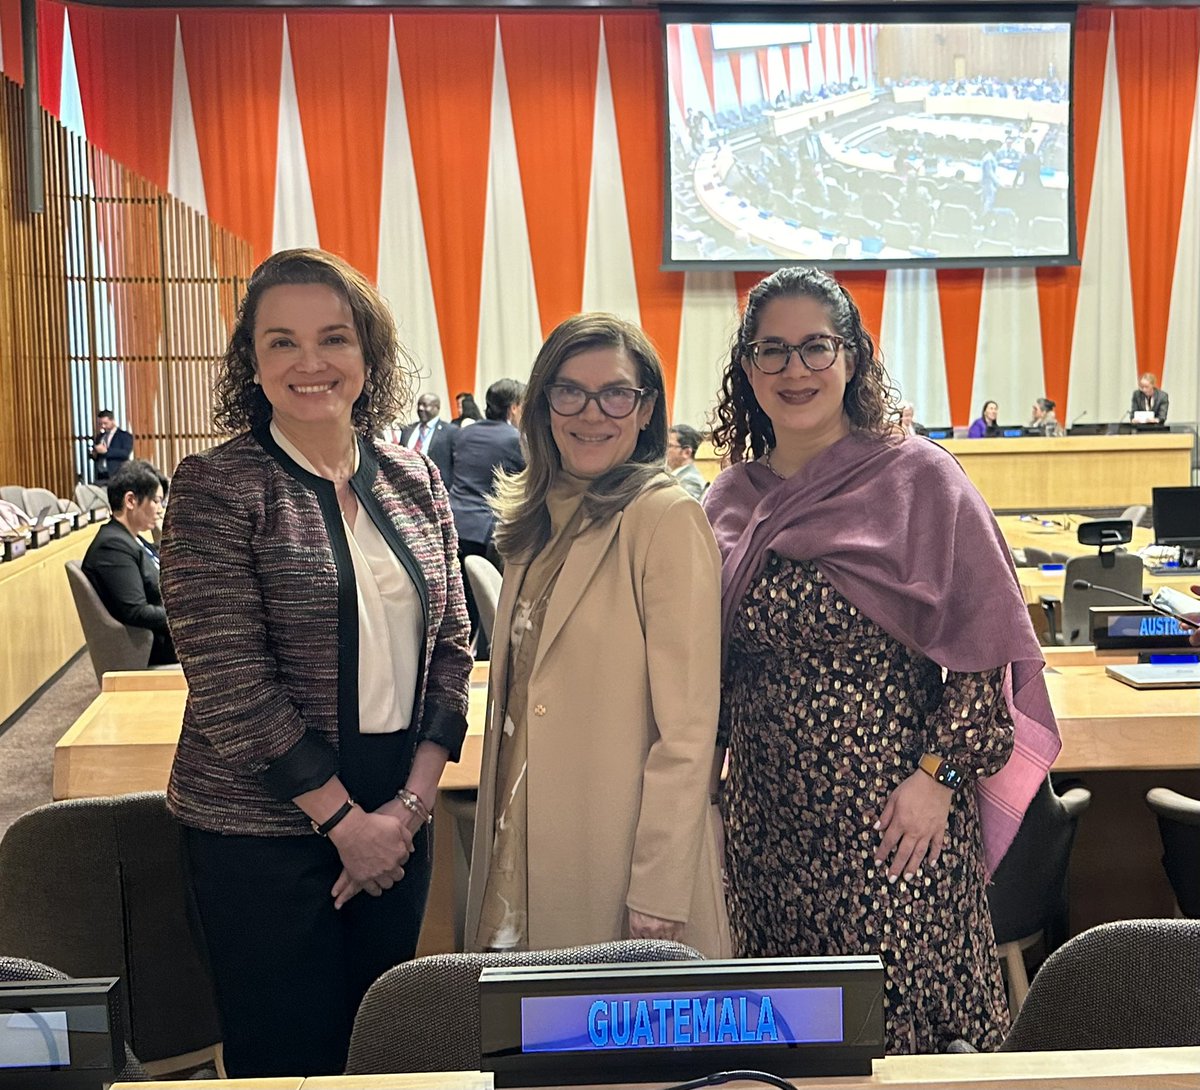 Guatemala 🇬🇹 elected today as member of the Executive Committee of the Program of the United Nations High Commissioner for Refugees (ExCom). Our appreciation to the Member States for their support to the Guatemalan candidature.